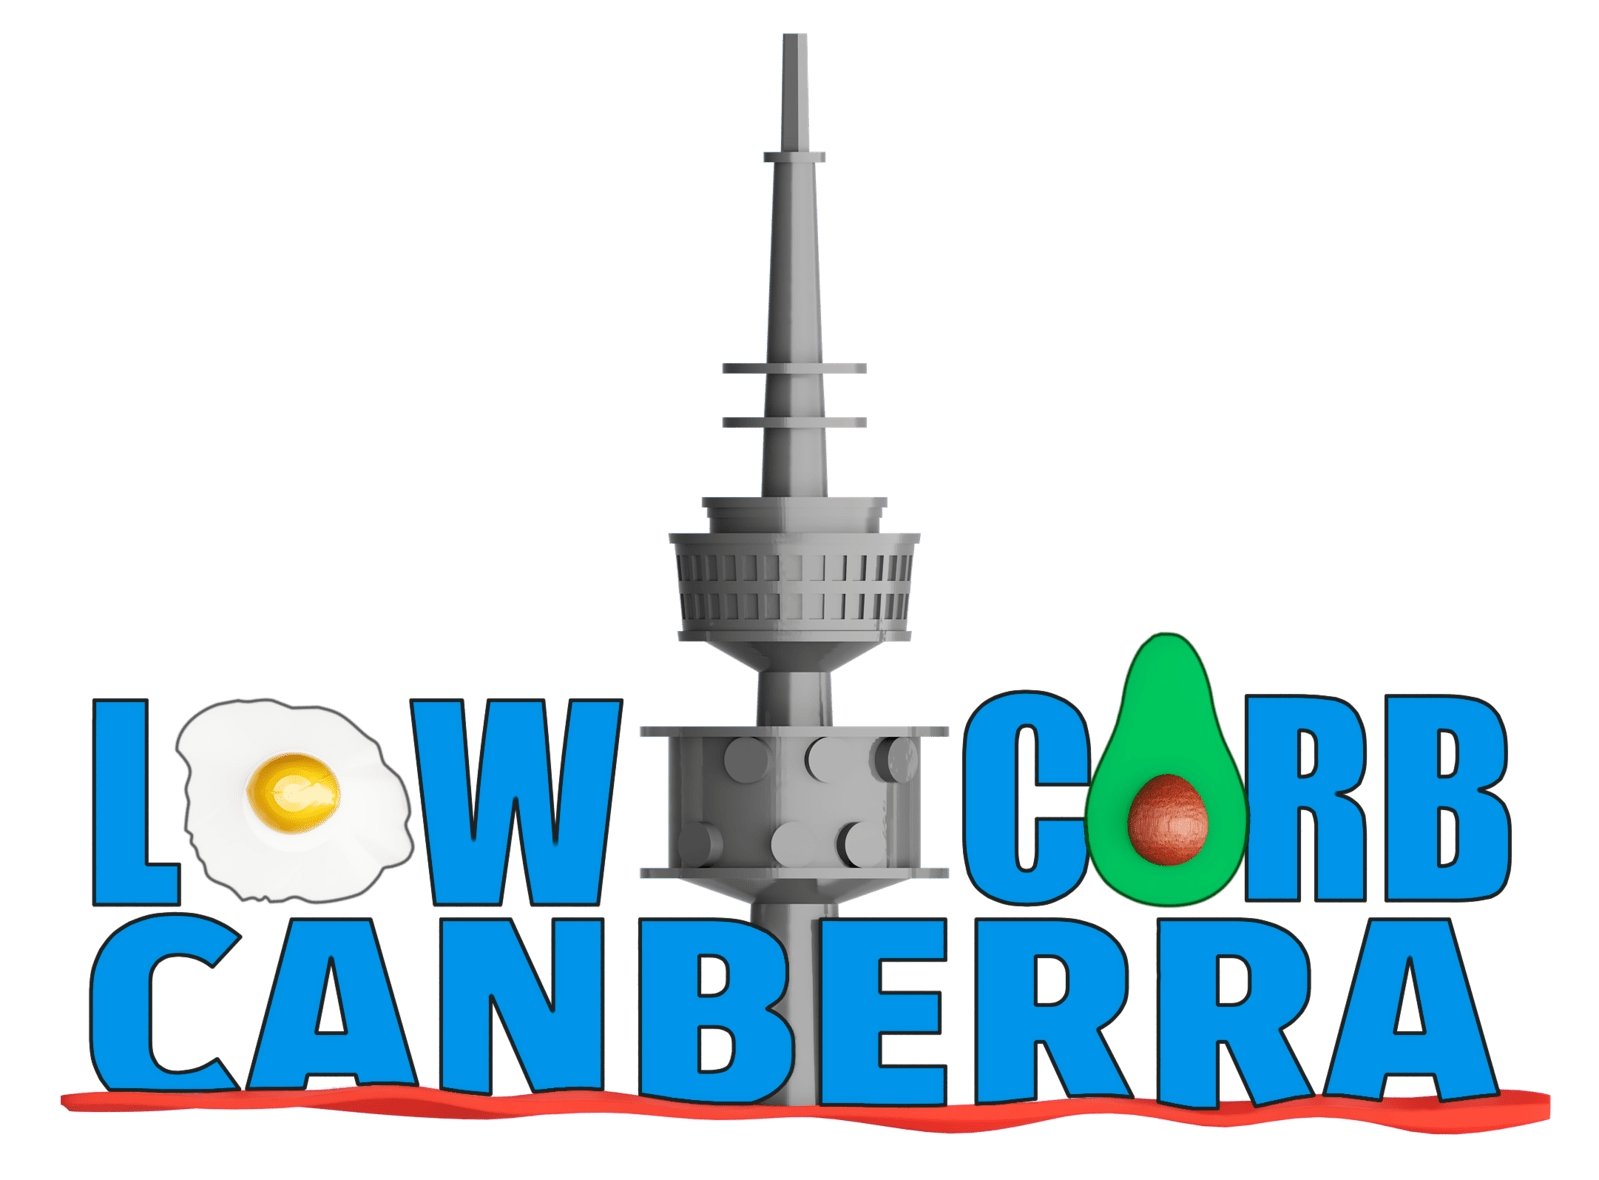 Low Carb Canberra is this weekend! - 19th-20th September 2020 - Yo Keto